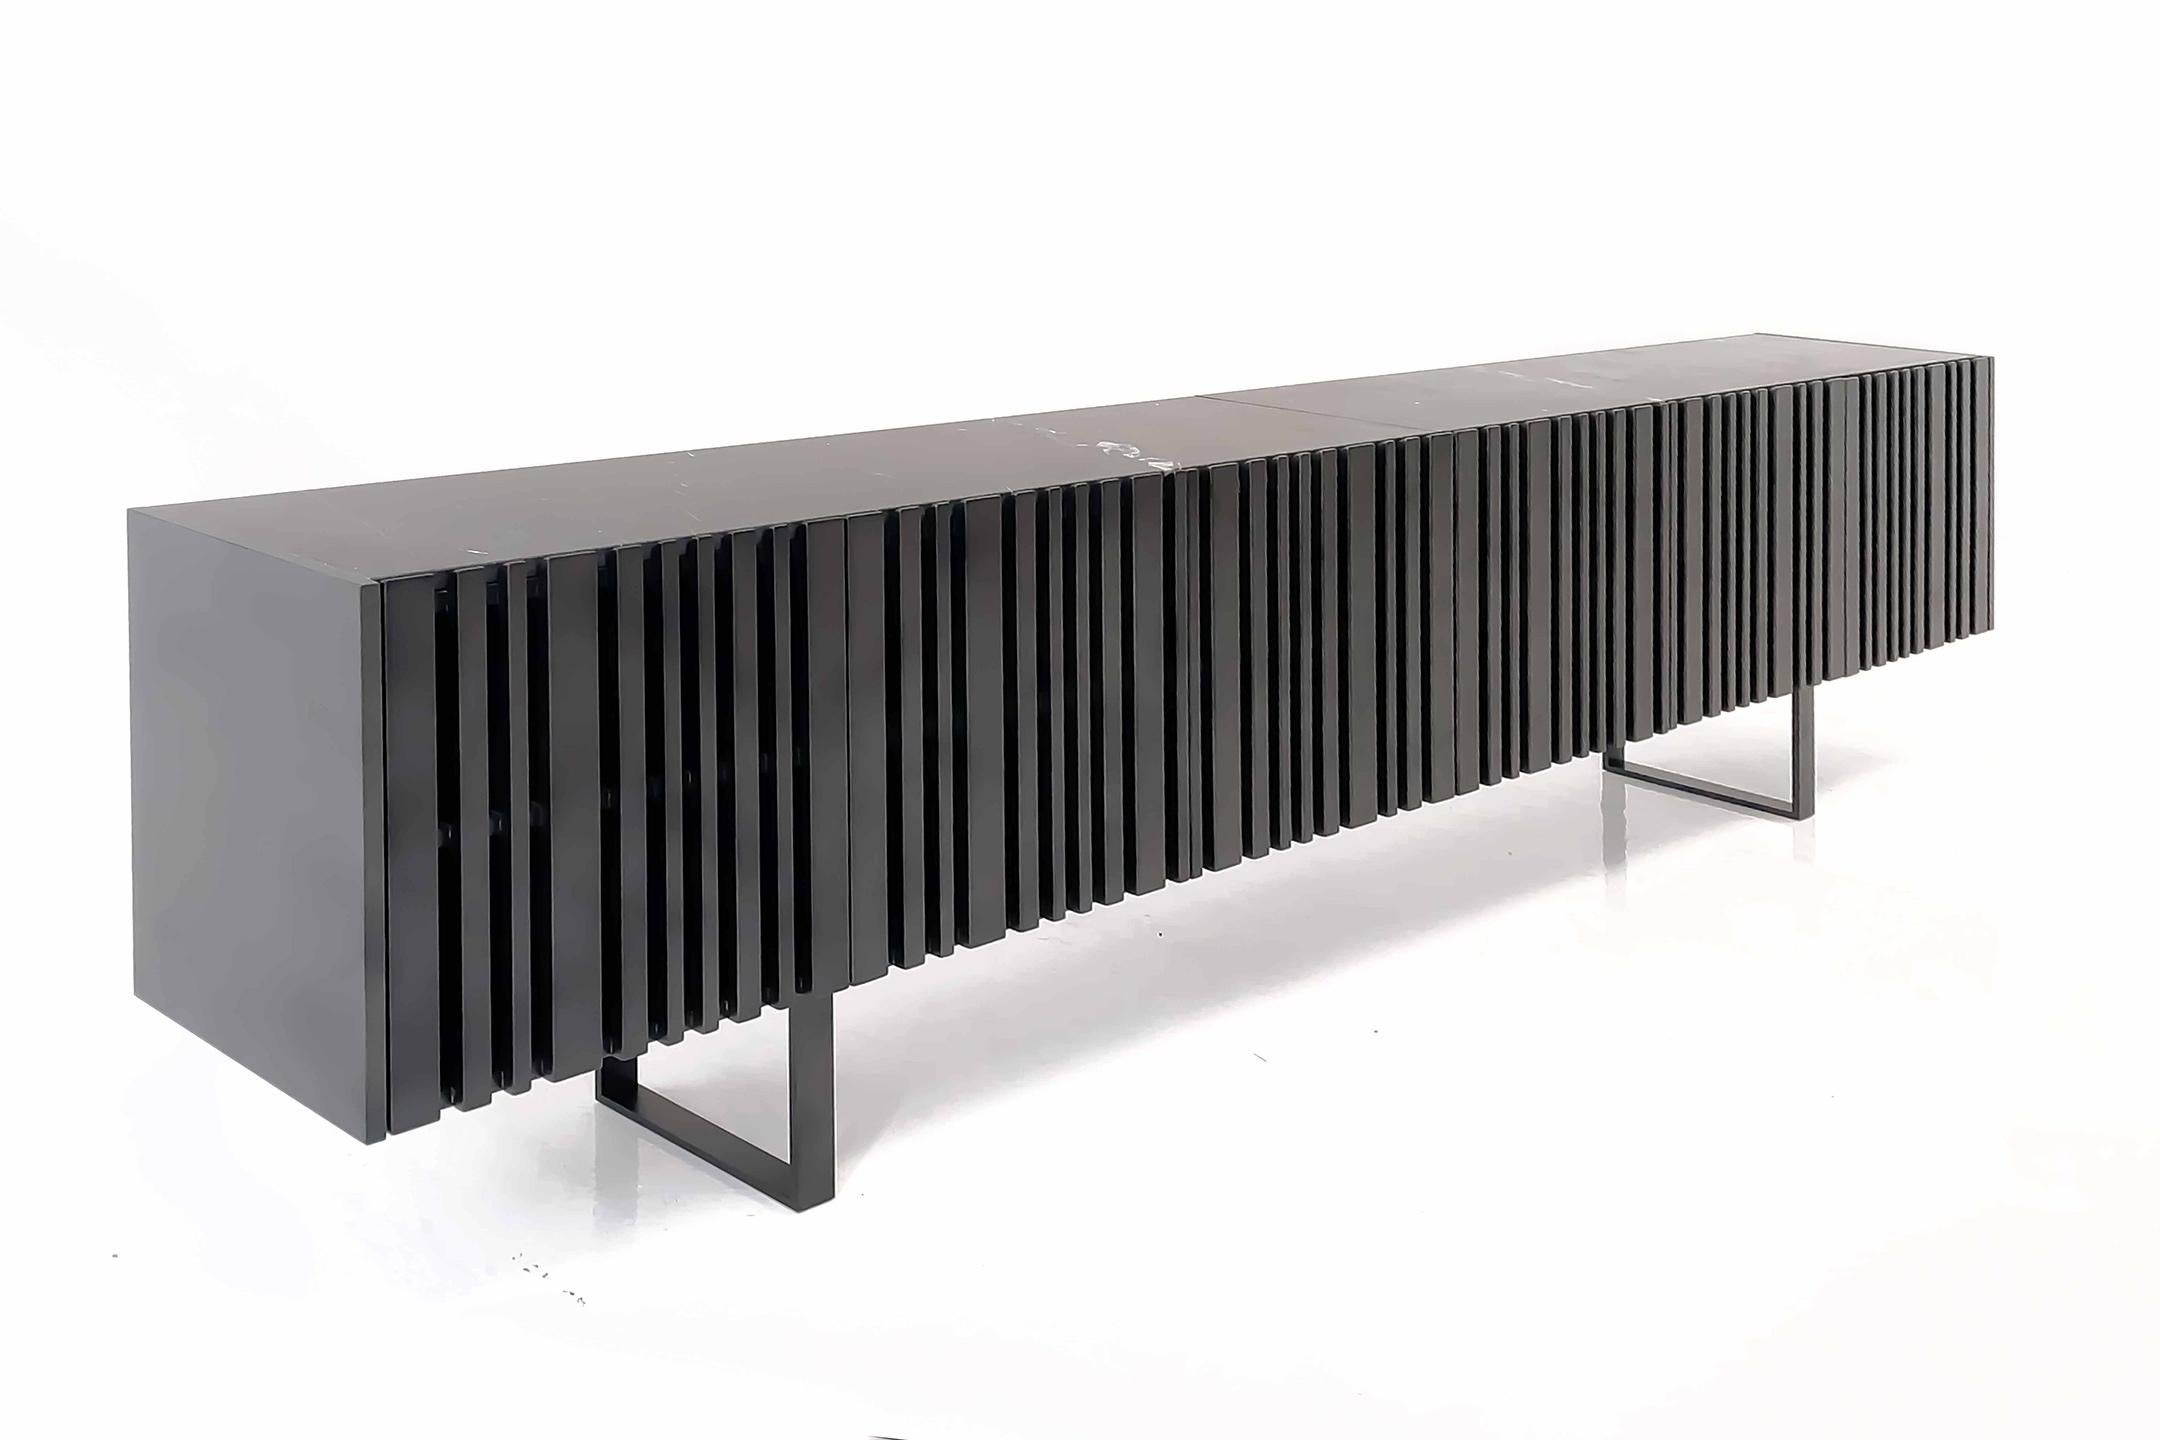 Brutalist credenza perfect to house media equipment and sound system
legs in metal patinas, doors and frame in metal liquid lacquer, Top in marble

Fully Customizable.